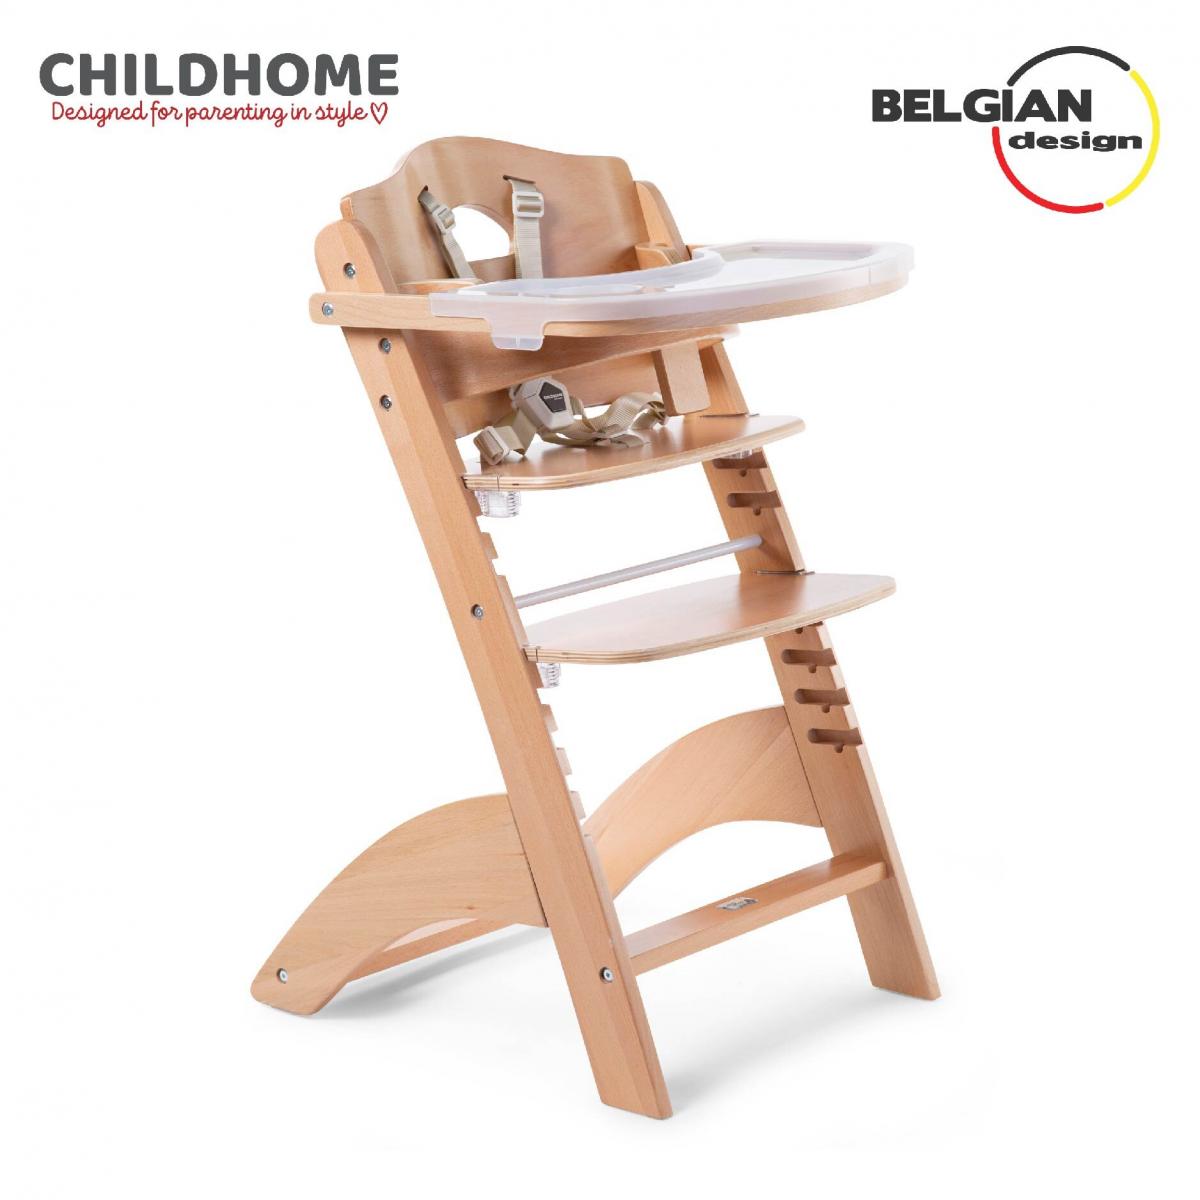 LAMBDA 3 Adjustable Highchair with Feeding Tray Cover, Footrest & 5-Point Safety Harness (Highchair suitable from 6 months to adult and as standard chair up to 85 kg) - Natural